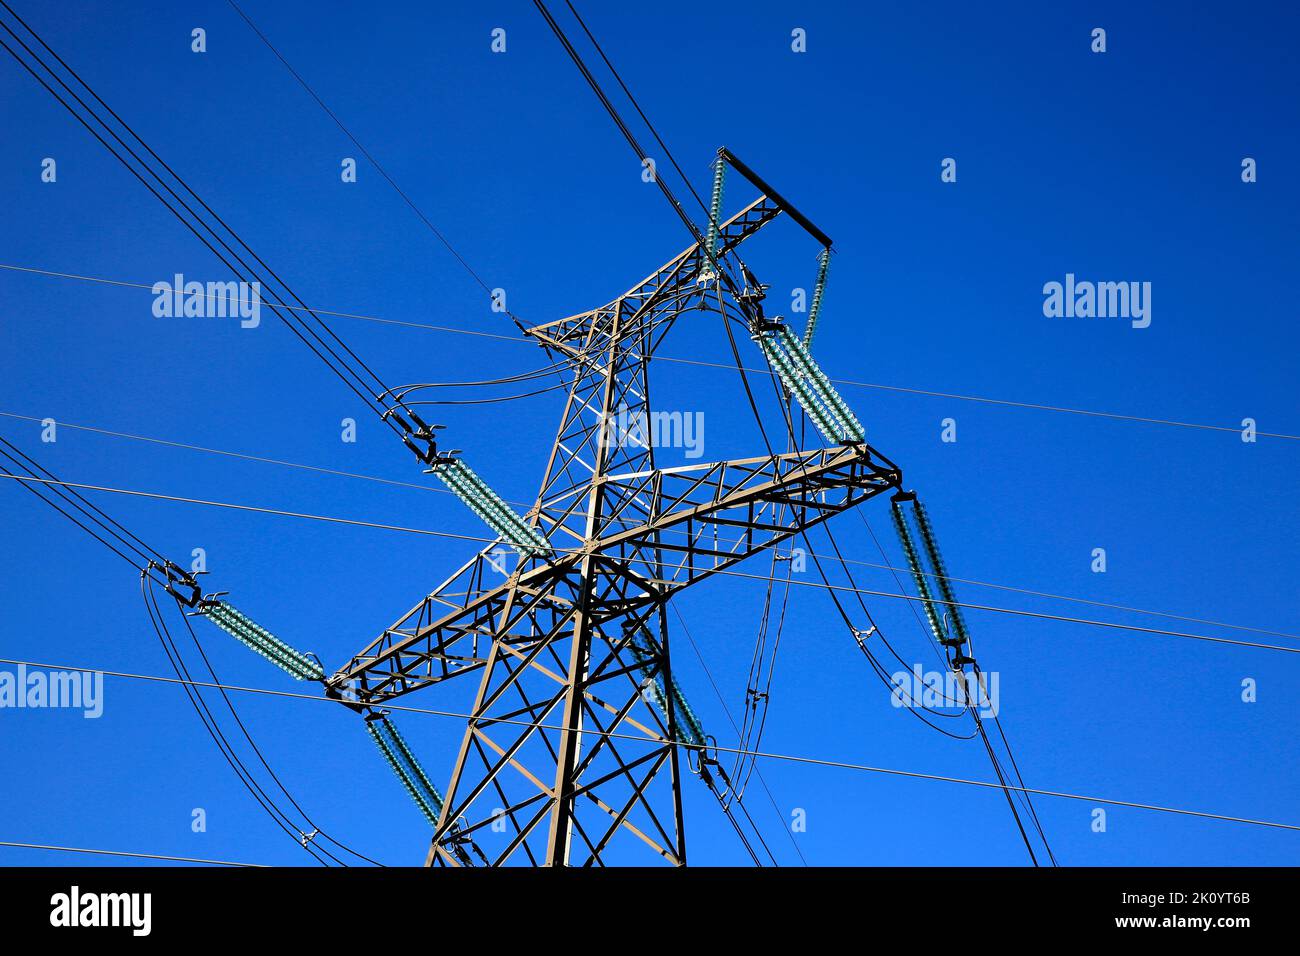 Overhead transmission line tower against blue sky. Stock Photo